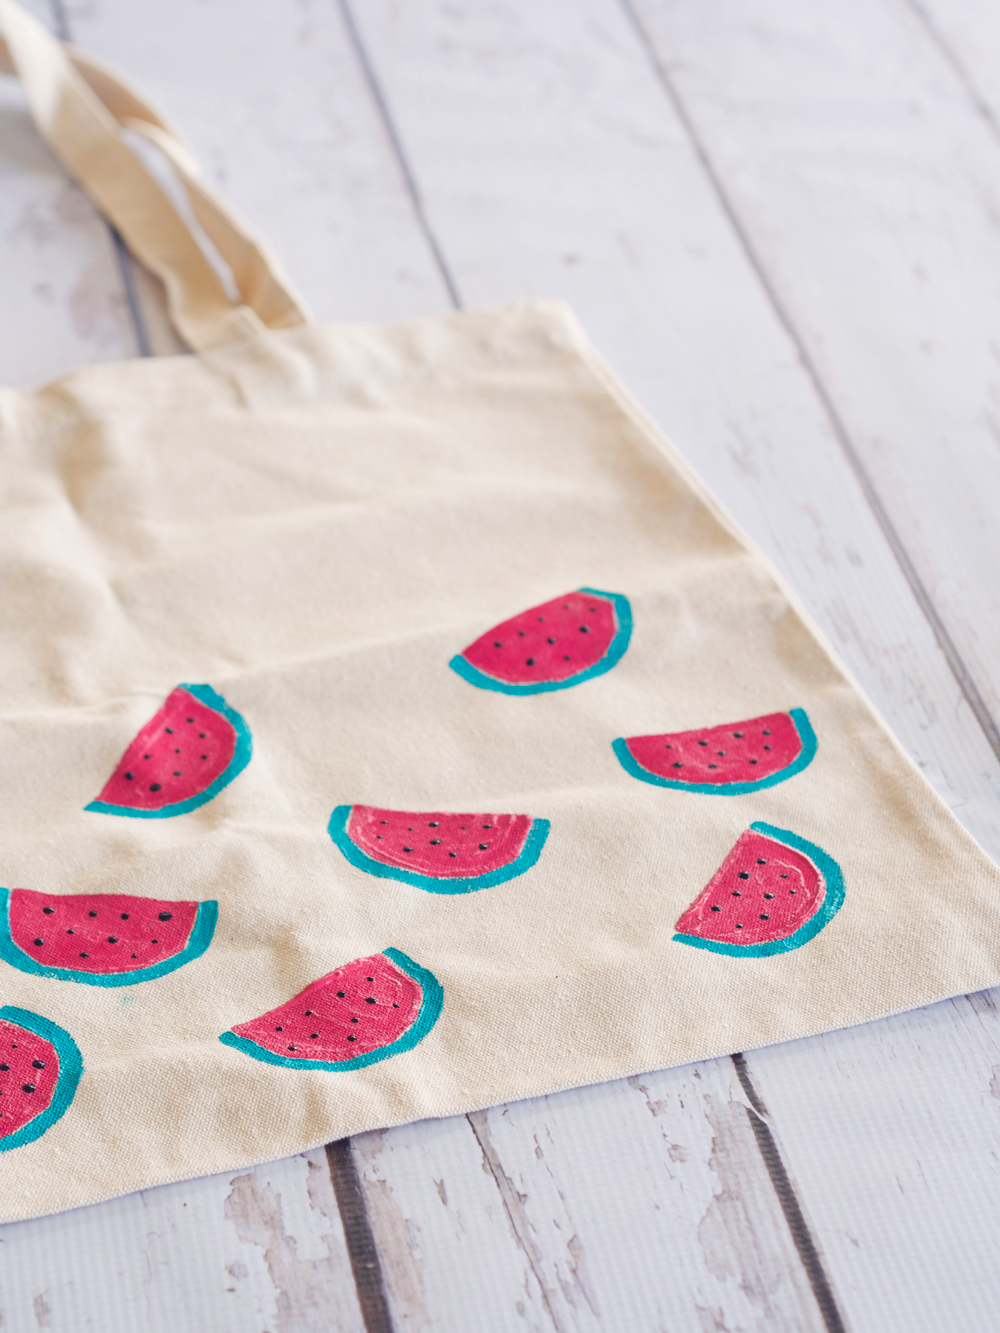 How to make a watermelon tote